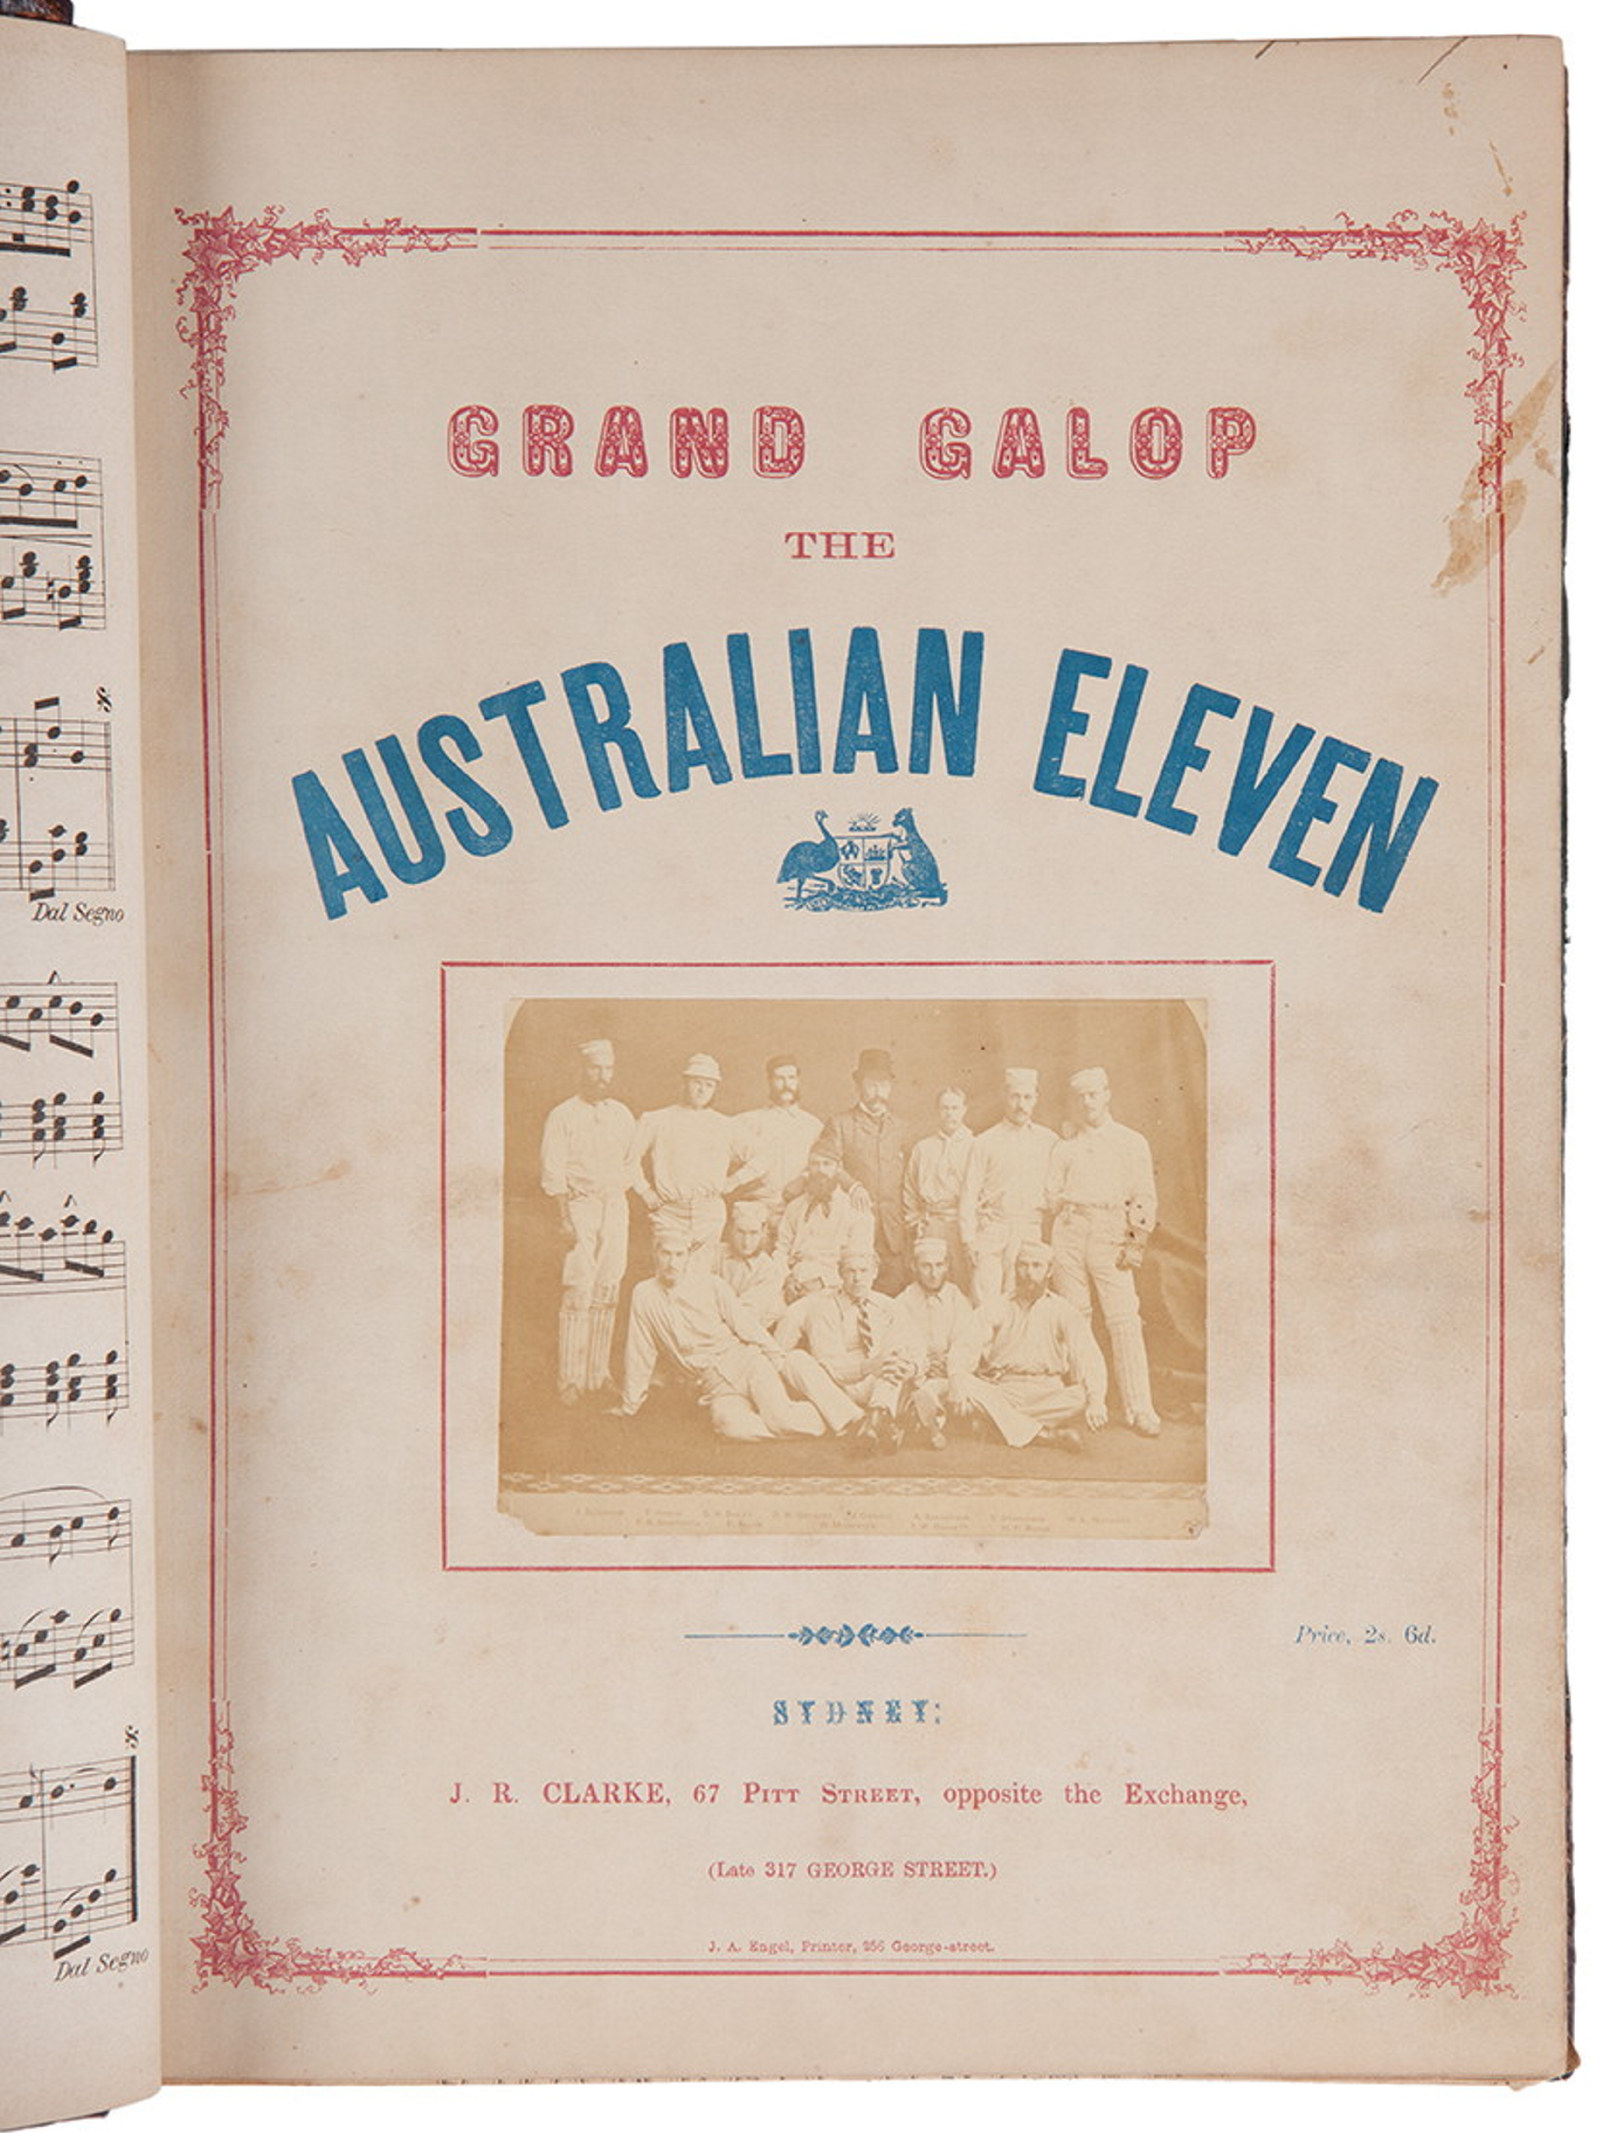 Cover of music book with title printed in red and blue above a photo of a cricket team.